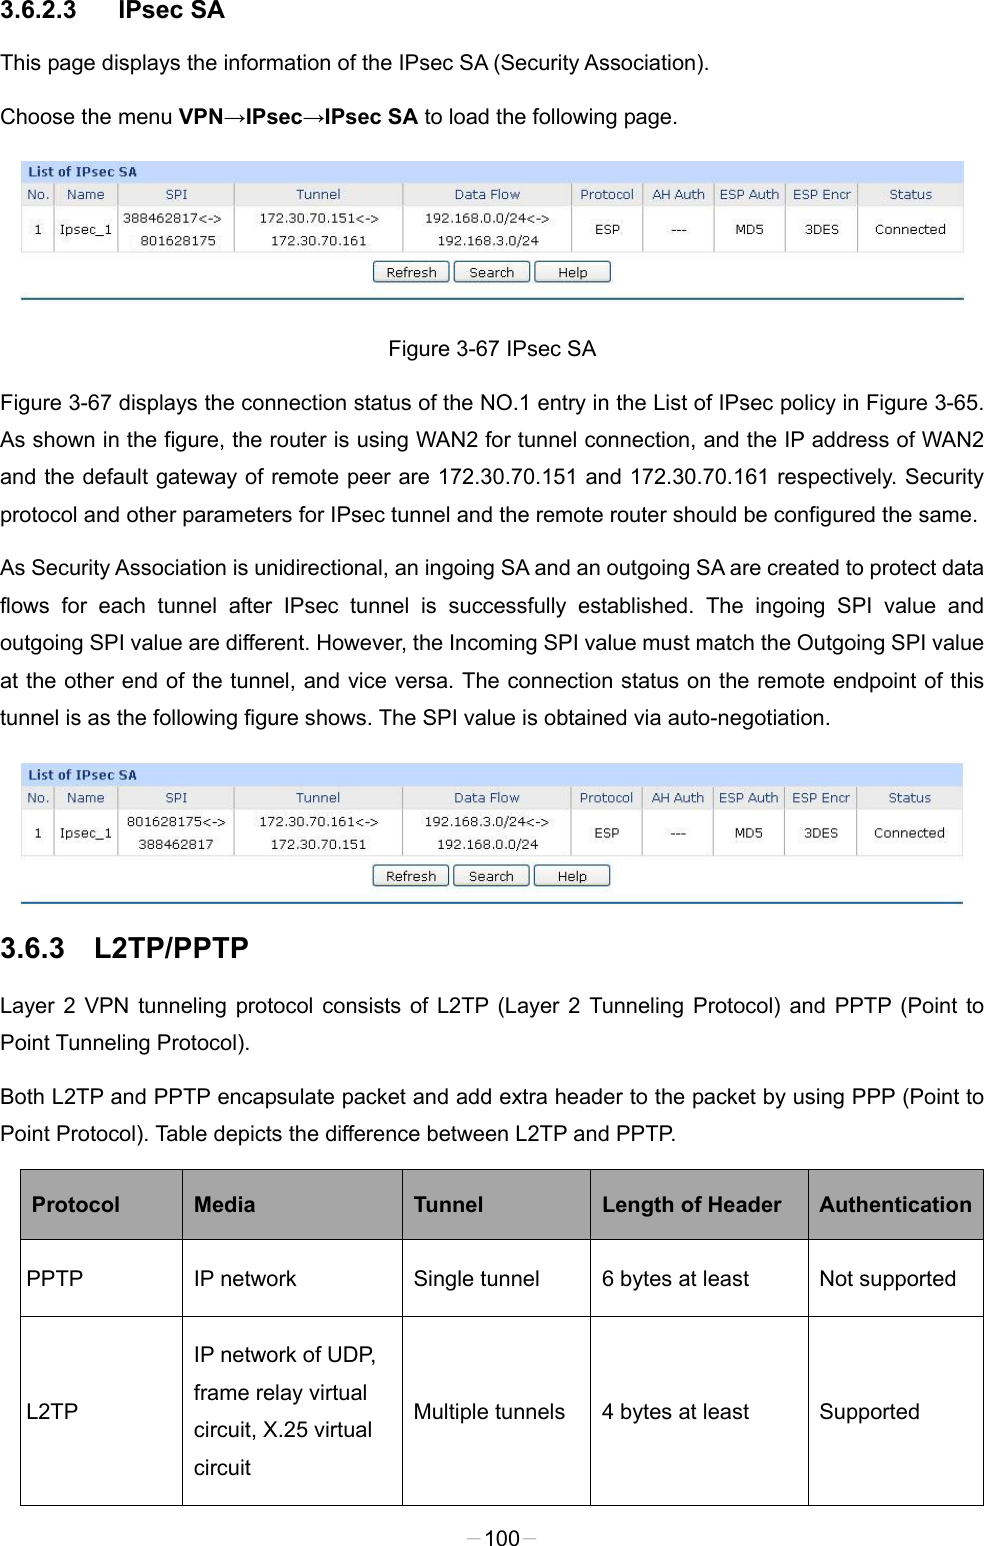  3.6.2.3 IPsec SA   This page displays the information of the IPsec SA (Security Association). Choose the menu VPN→IPsec→IPsec SA to load the following page.  Figure 3-67 IPsec SA Figure 3-67 displays the connection status of the NO.1 entry in the List of IPsec policy in Figure 3-65. As shown in the figure, the router is using WAN2 for tunnel connection, and the IP address of WAN2 and the default gateway of remote peer are 172.30.70.151 and 172.30.70.161 respectively. Security protocol and other parameters for IPsec tunnel and the remote router should be configured the same. As Security Association is unidirectional, an ingoing SA and an outgoing SA are created to protect data flows for each tunnel after IPsec tunnel is successfully established. The ingoing SPI value and outgoing SPI value are different. However, the Incoming SPI value must match the Outgoing SPI value at the other end of the tunnel, and vice versa. The connection status on the remote endpoint of this tunnel is as the following figure shows. The SPI value is obtained via auto-negotiation.    3.6.3 L2TP/PPTP Layer 2 VPN tunneling protocol consists of L2TP (Layer 2 Tunneling Protocol) and PPTP (Point to Point Tunneling Protocol).   Both L2TP and PPTP encapsulate packet and add extra header to the packet by using PPP (Point to Point Protocol). Table depicts the difference between L2TP and PPTP. Protocol Media Tunnel Length of Header Authentication PPTP IP network Single tunnel 6 bytes at least Not supported L2TP IP network of UDP, frame relay virtual circuit, X.25 virtual circuit Multiple tunnels 4 bytes at least Supported -100- 